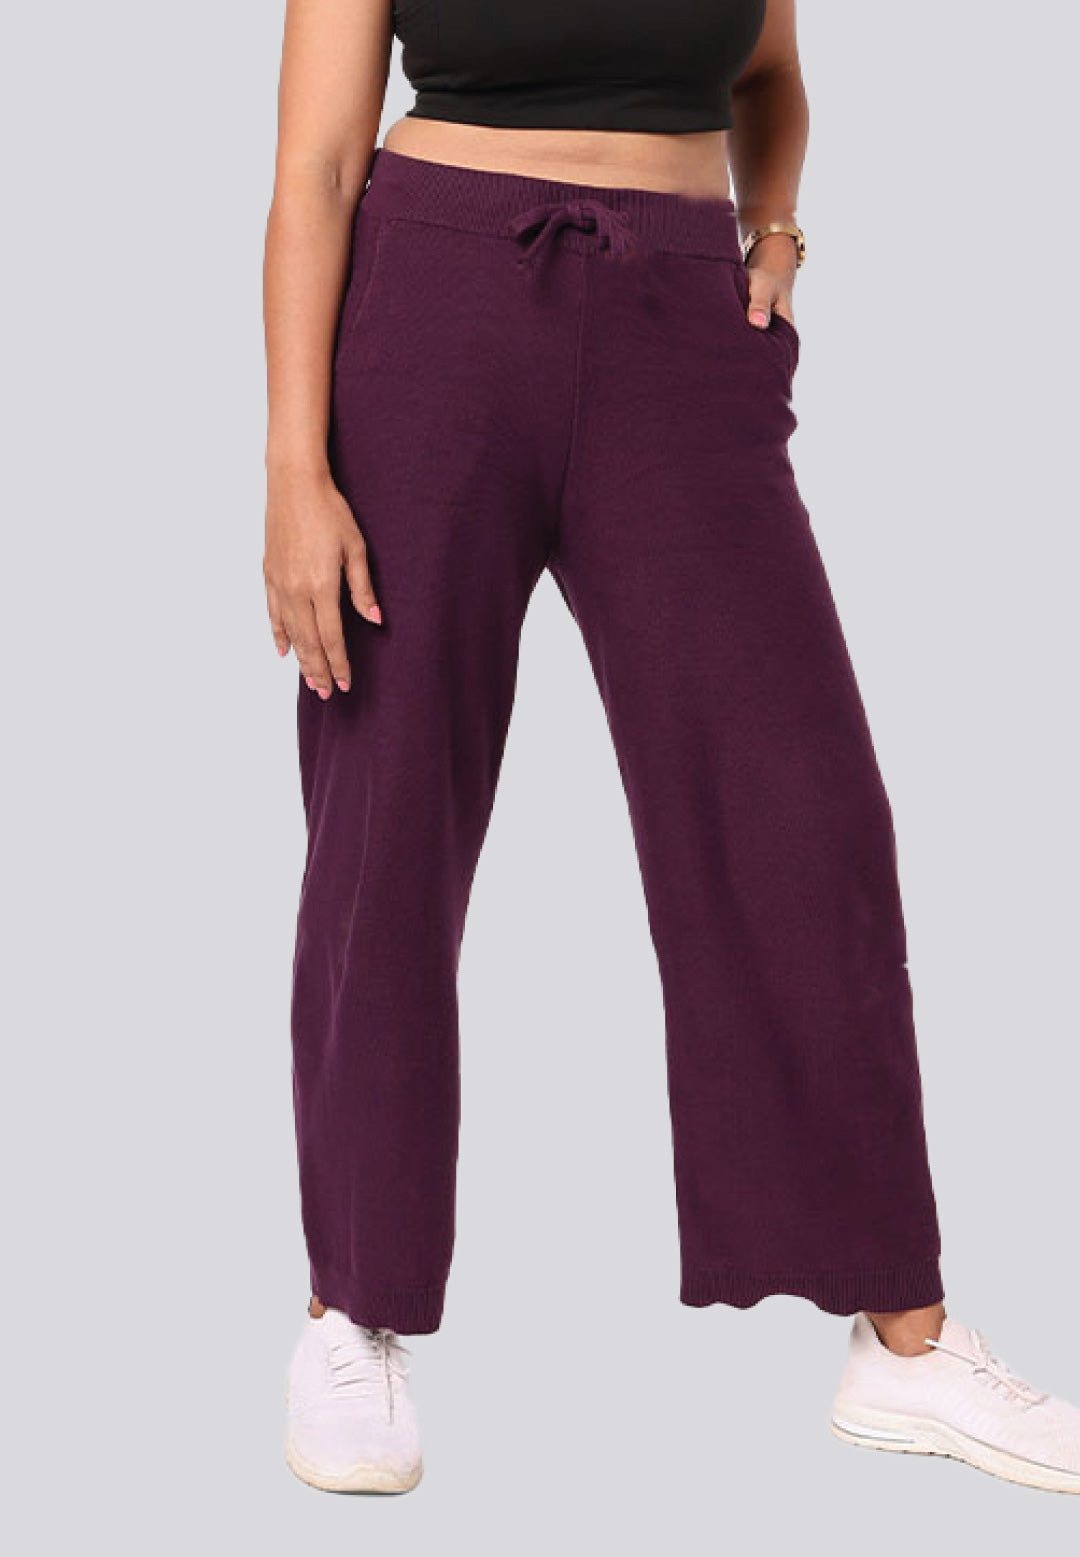 Comfy All Day Pants Tall